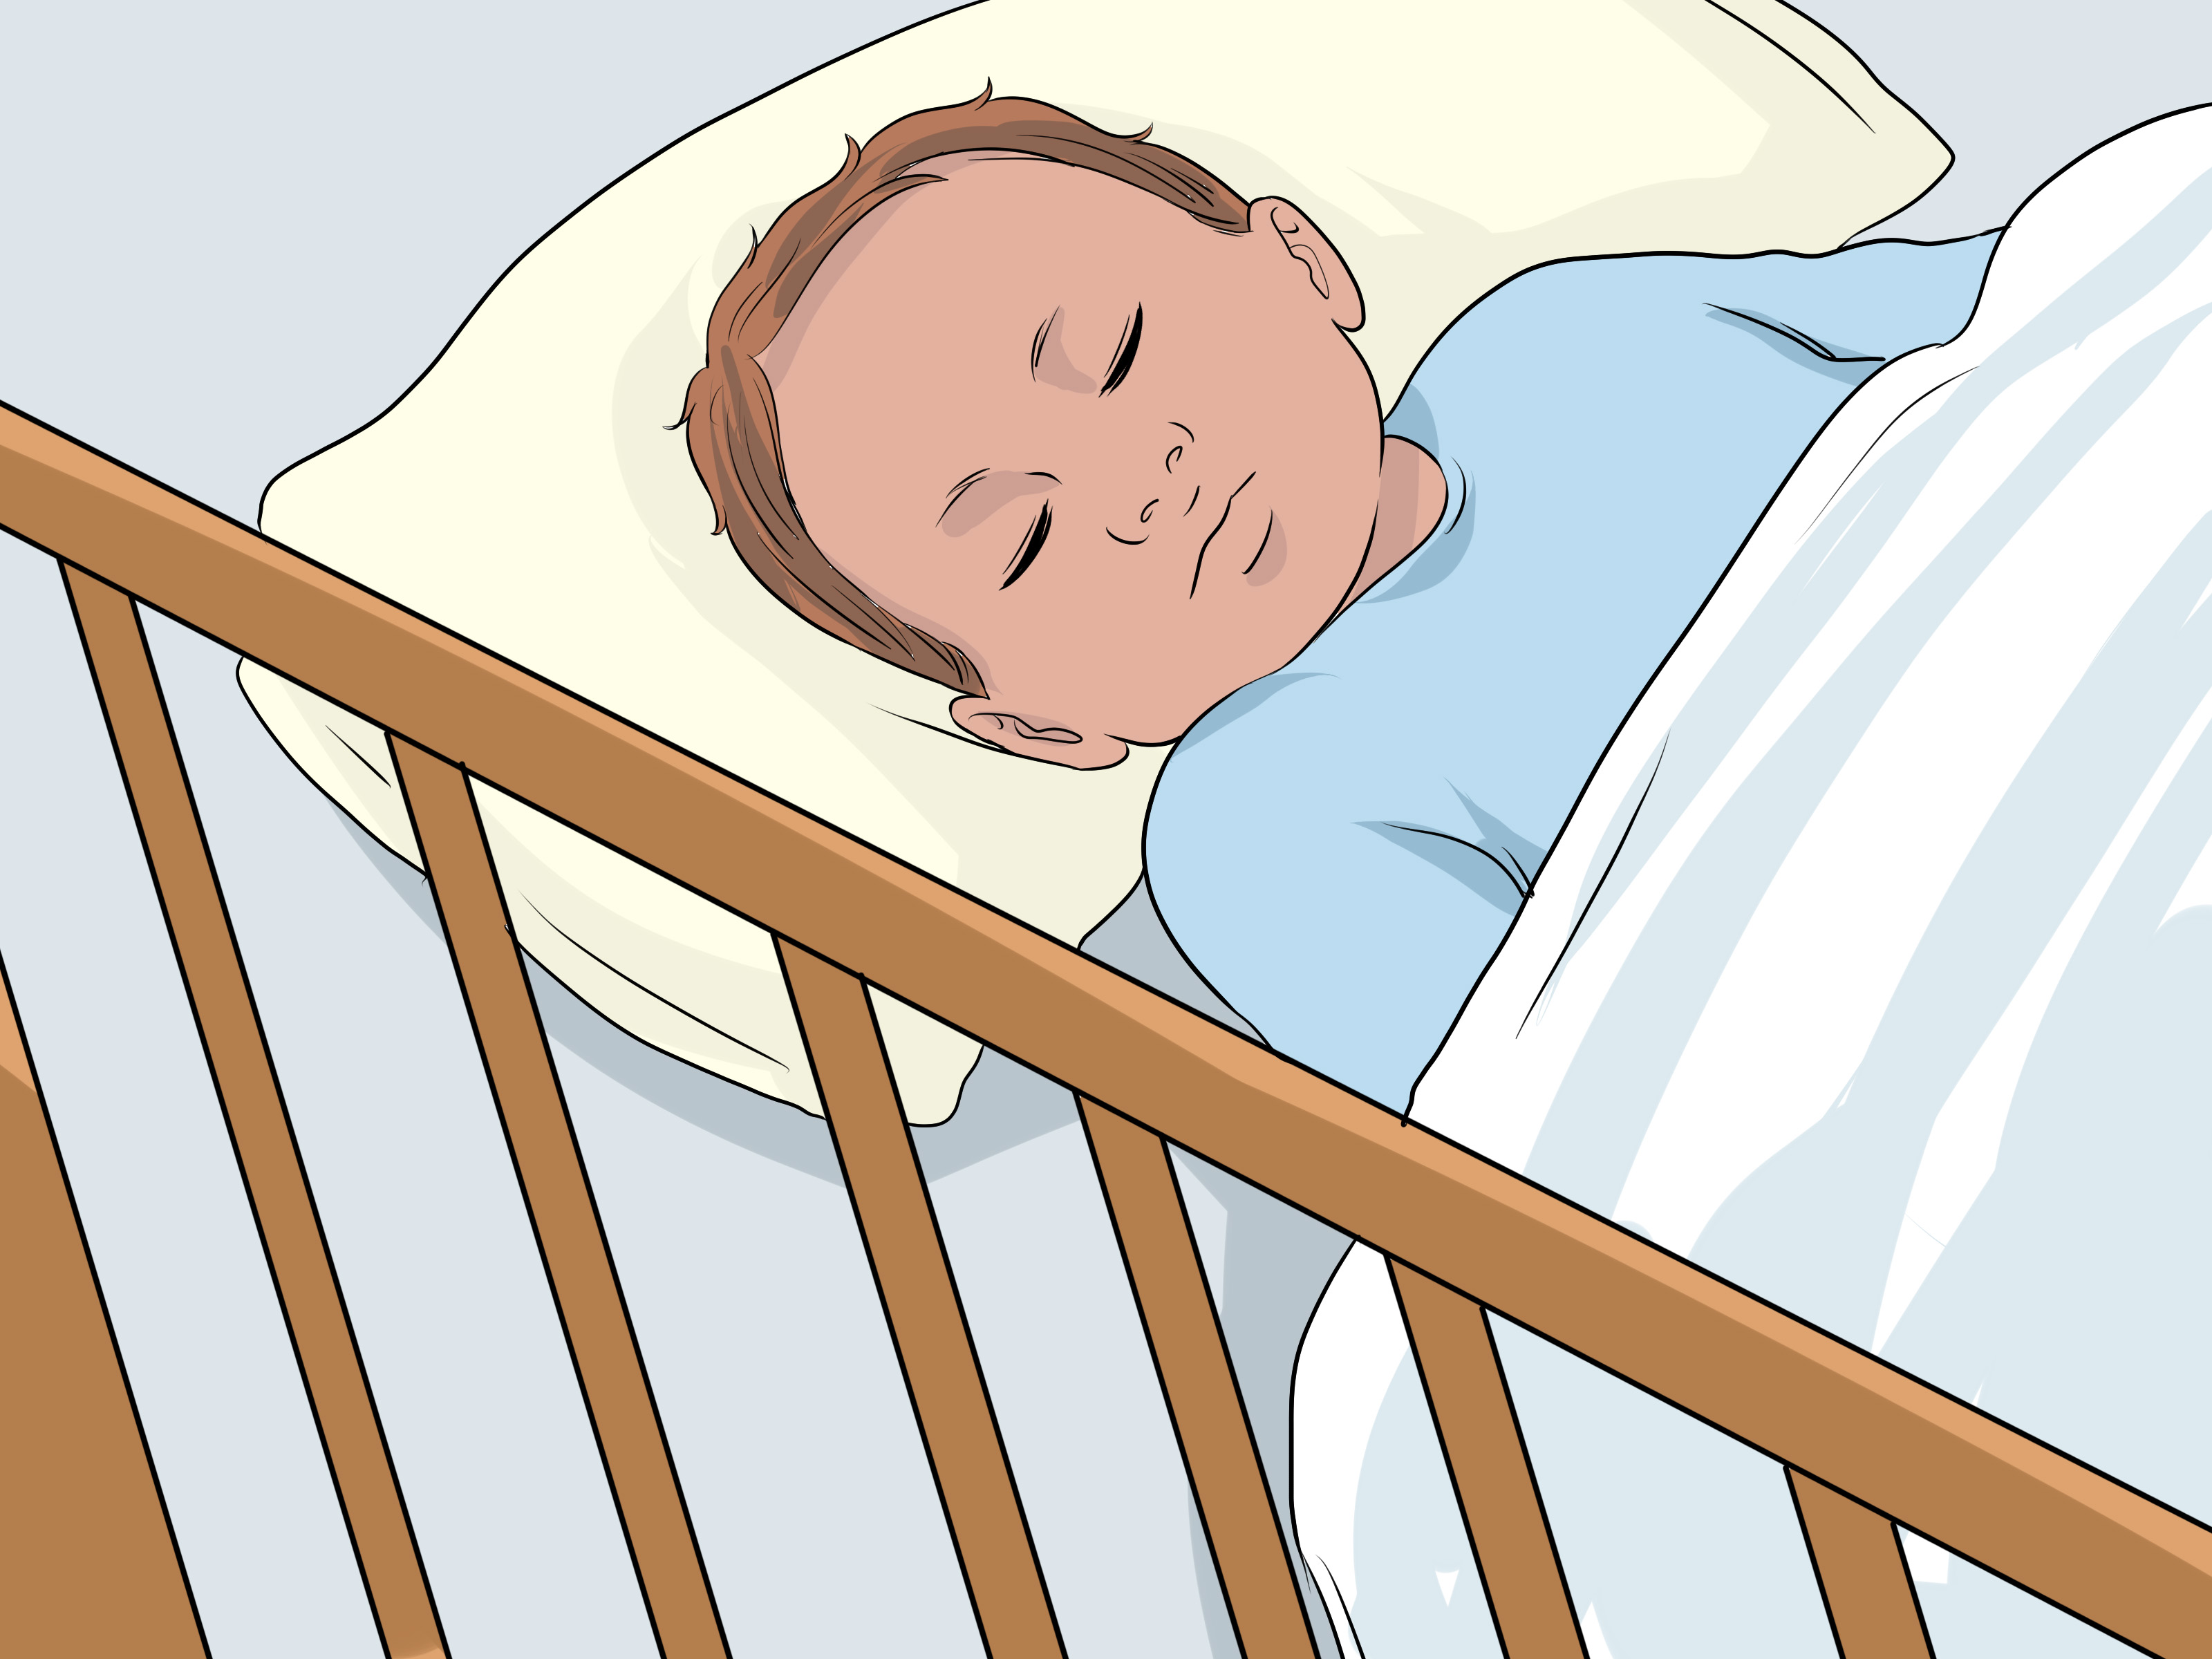  ways to make. Bedtime clipart cozy bed